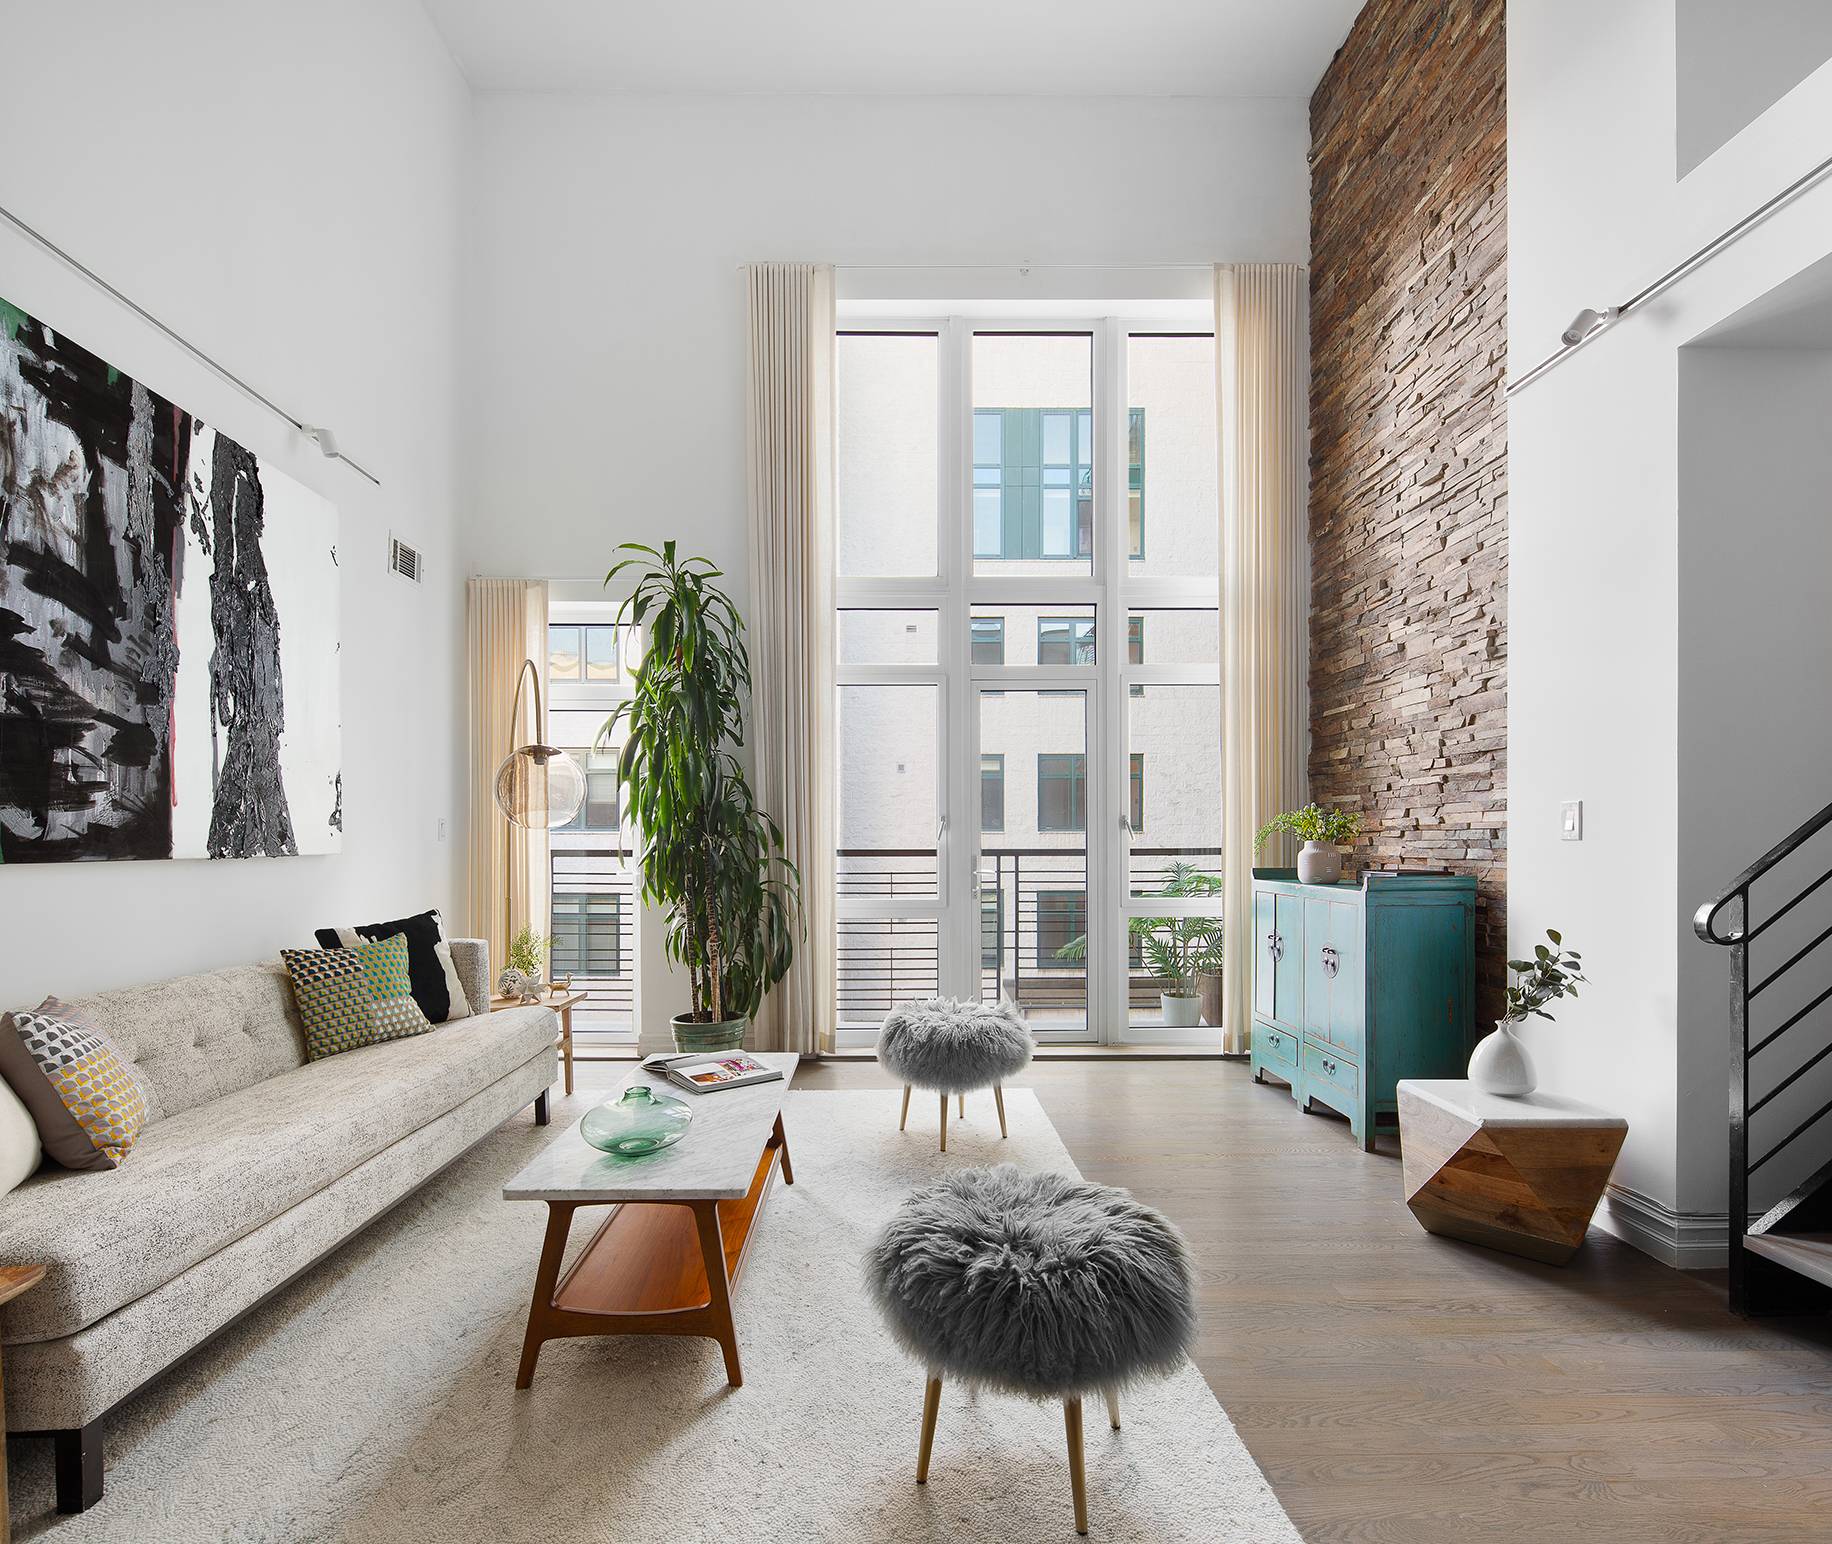 Welcome to apartment B3G an expansive, effortlessly chic 3 bed 3 bath duplex with home office, storage and a tax abatement in the heart of Prospect Heights !